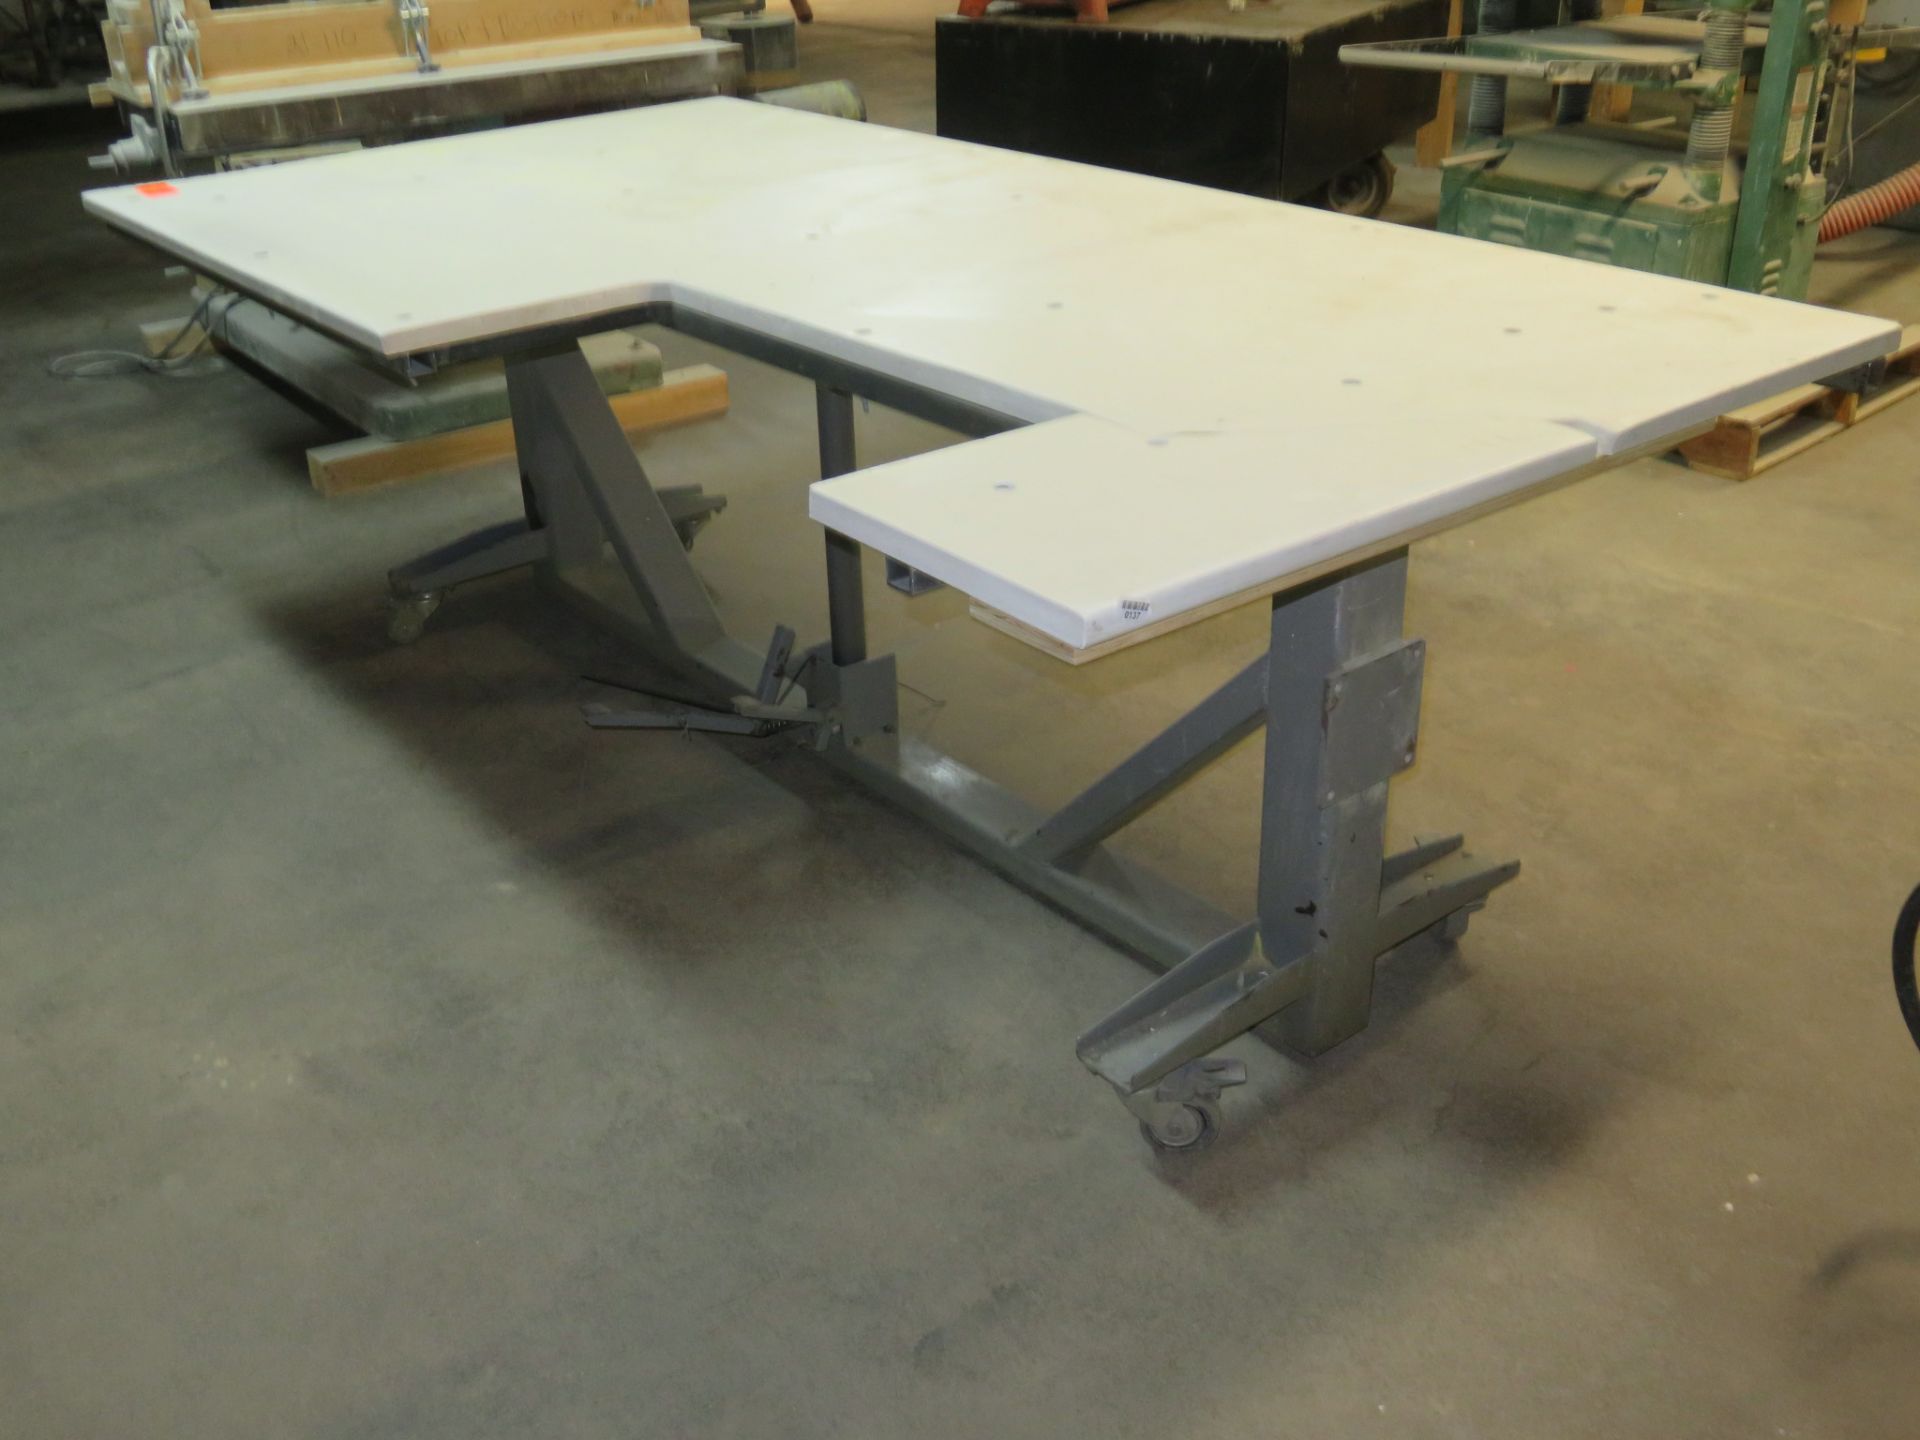 Unidex Manual Lift Table approx 4'x8' - Image 2 of 4